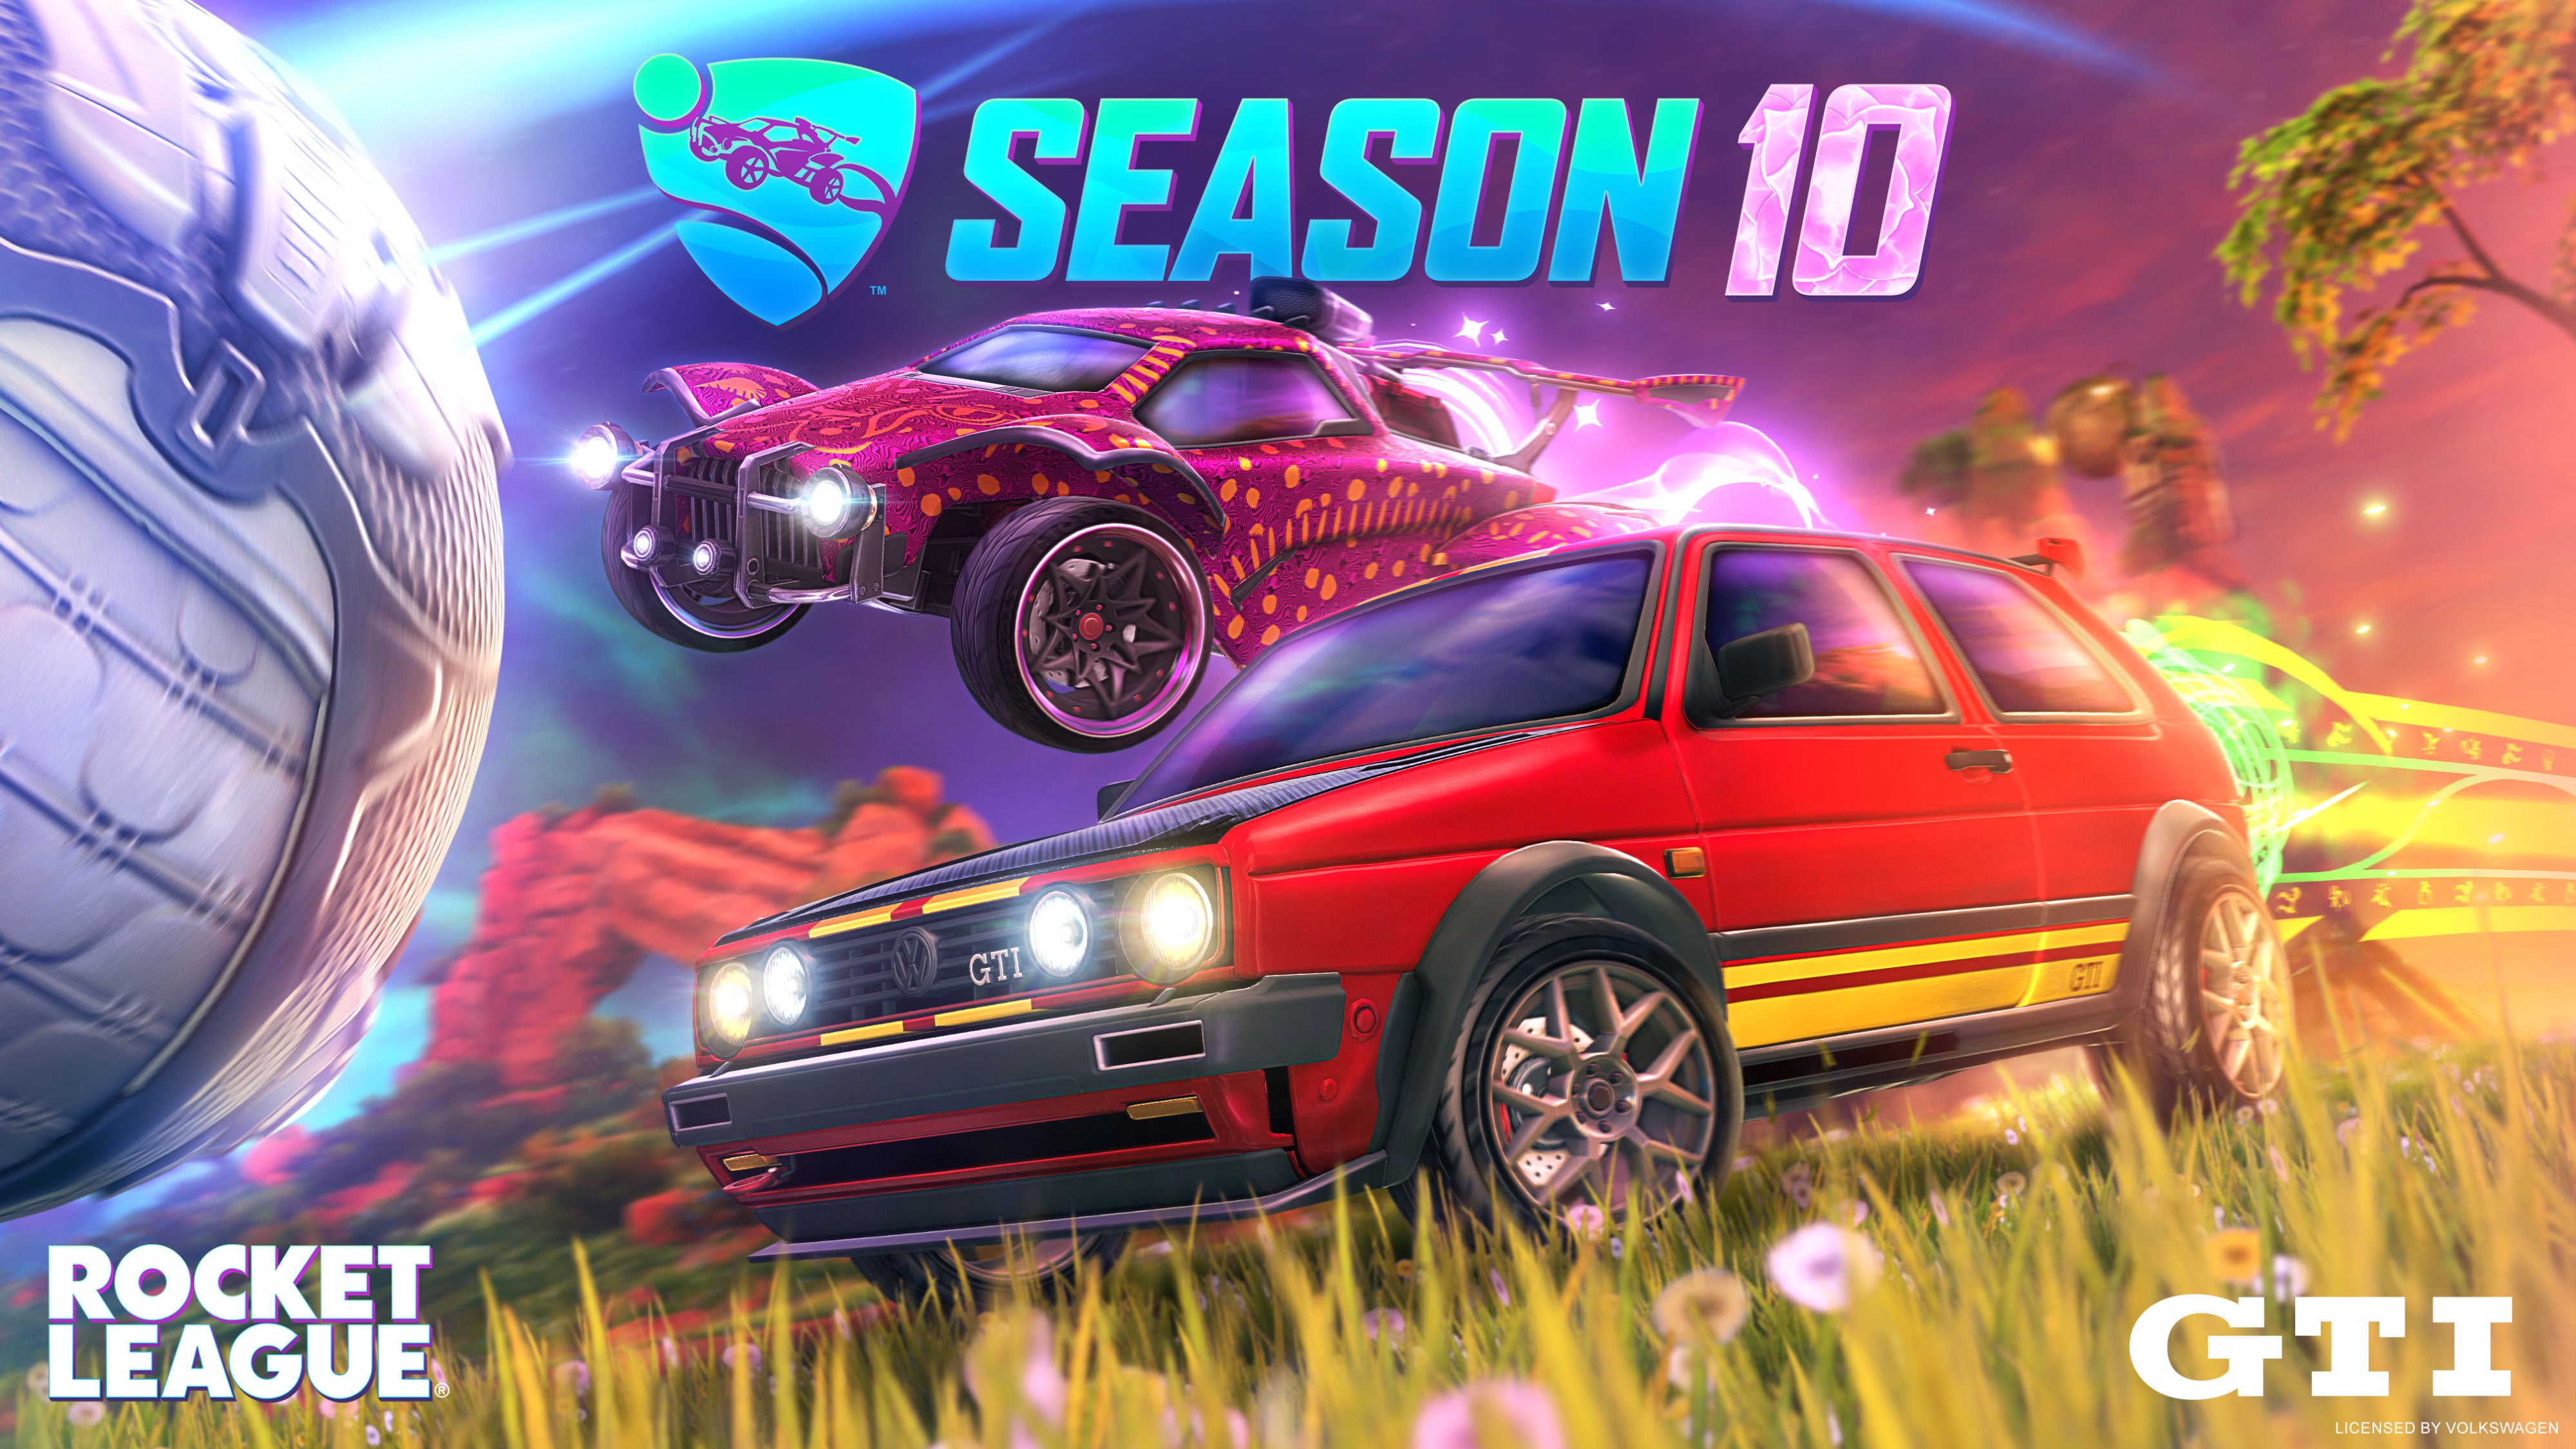 Rocket League Season 10 launches March 10 - adds game mode wait timer and other limited-time features